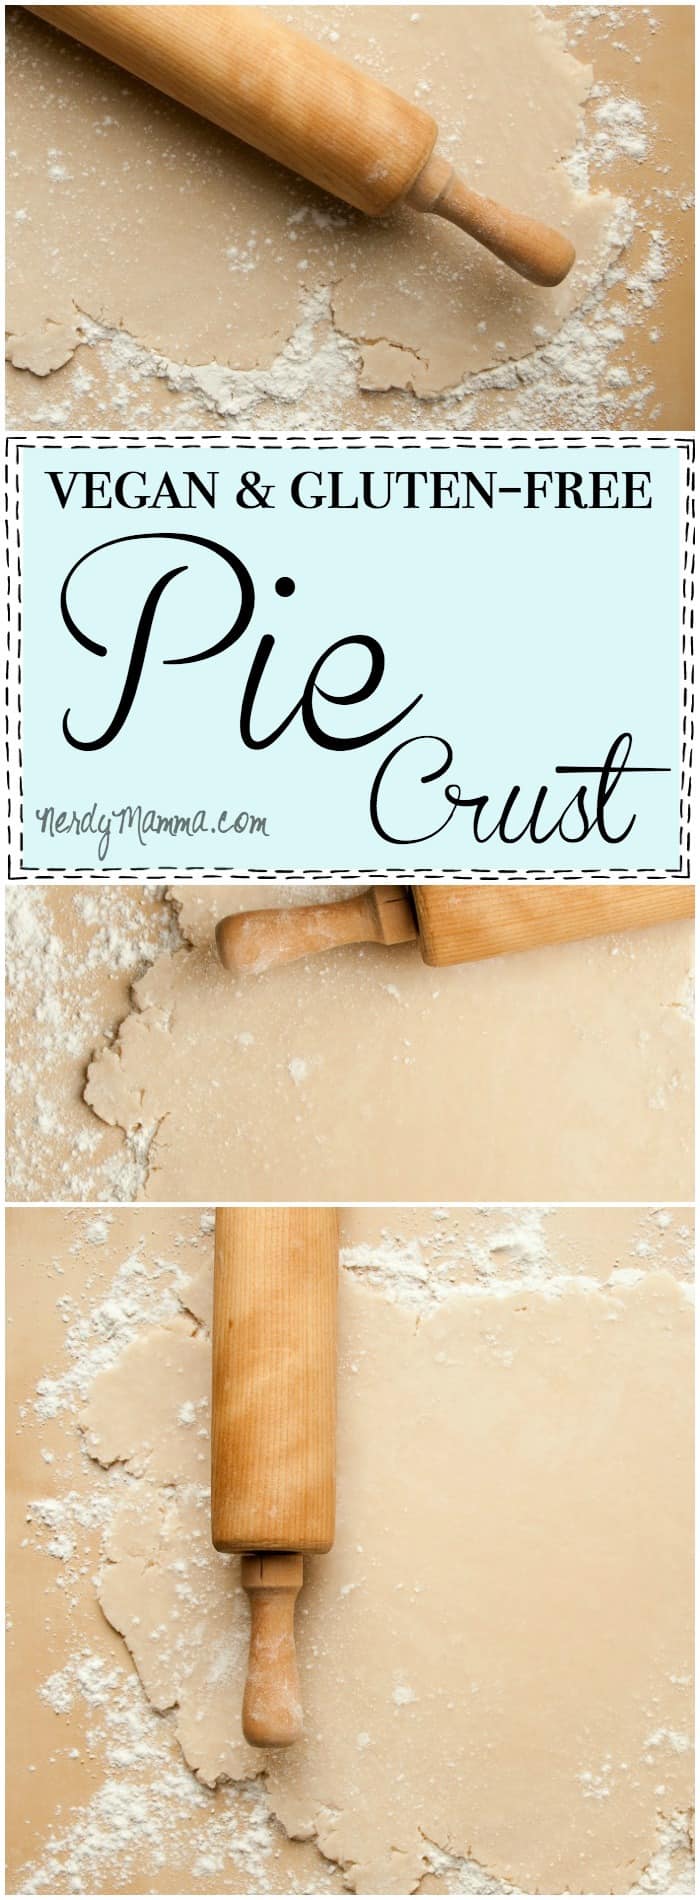 This recipe for vegan and gluten-free pie crust is so easy! And flaky--I thought it would be dry, but it's perfect! Love it!